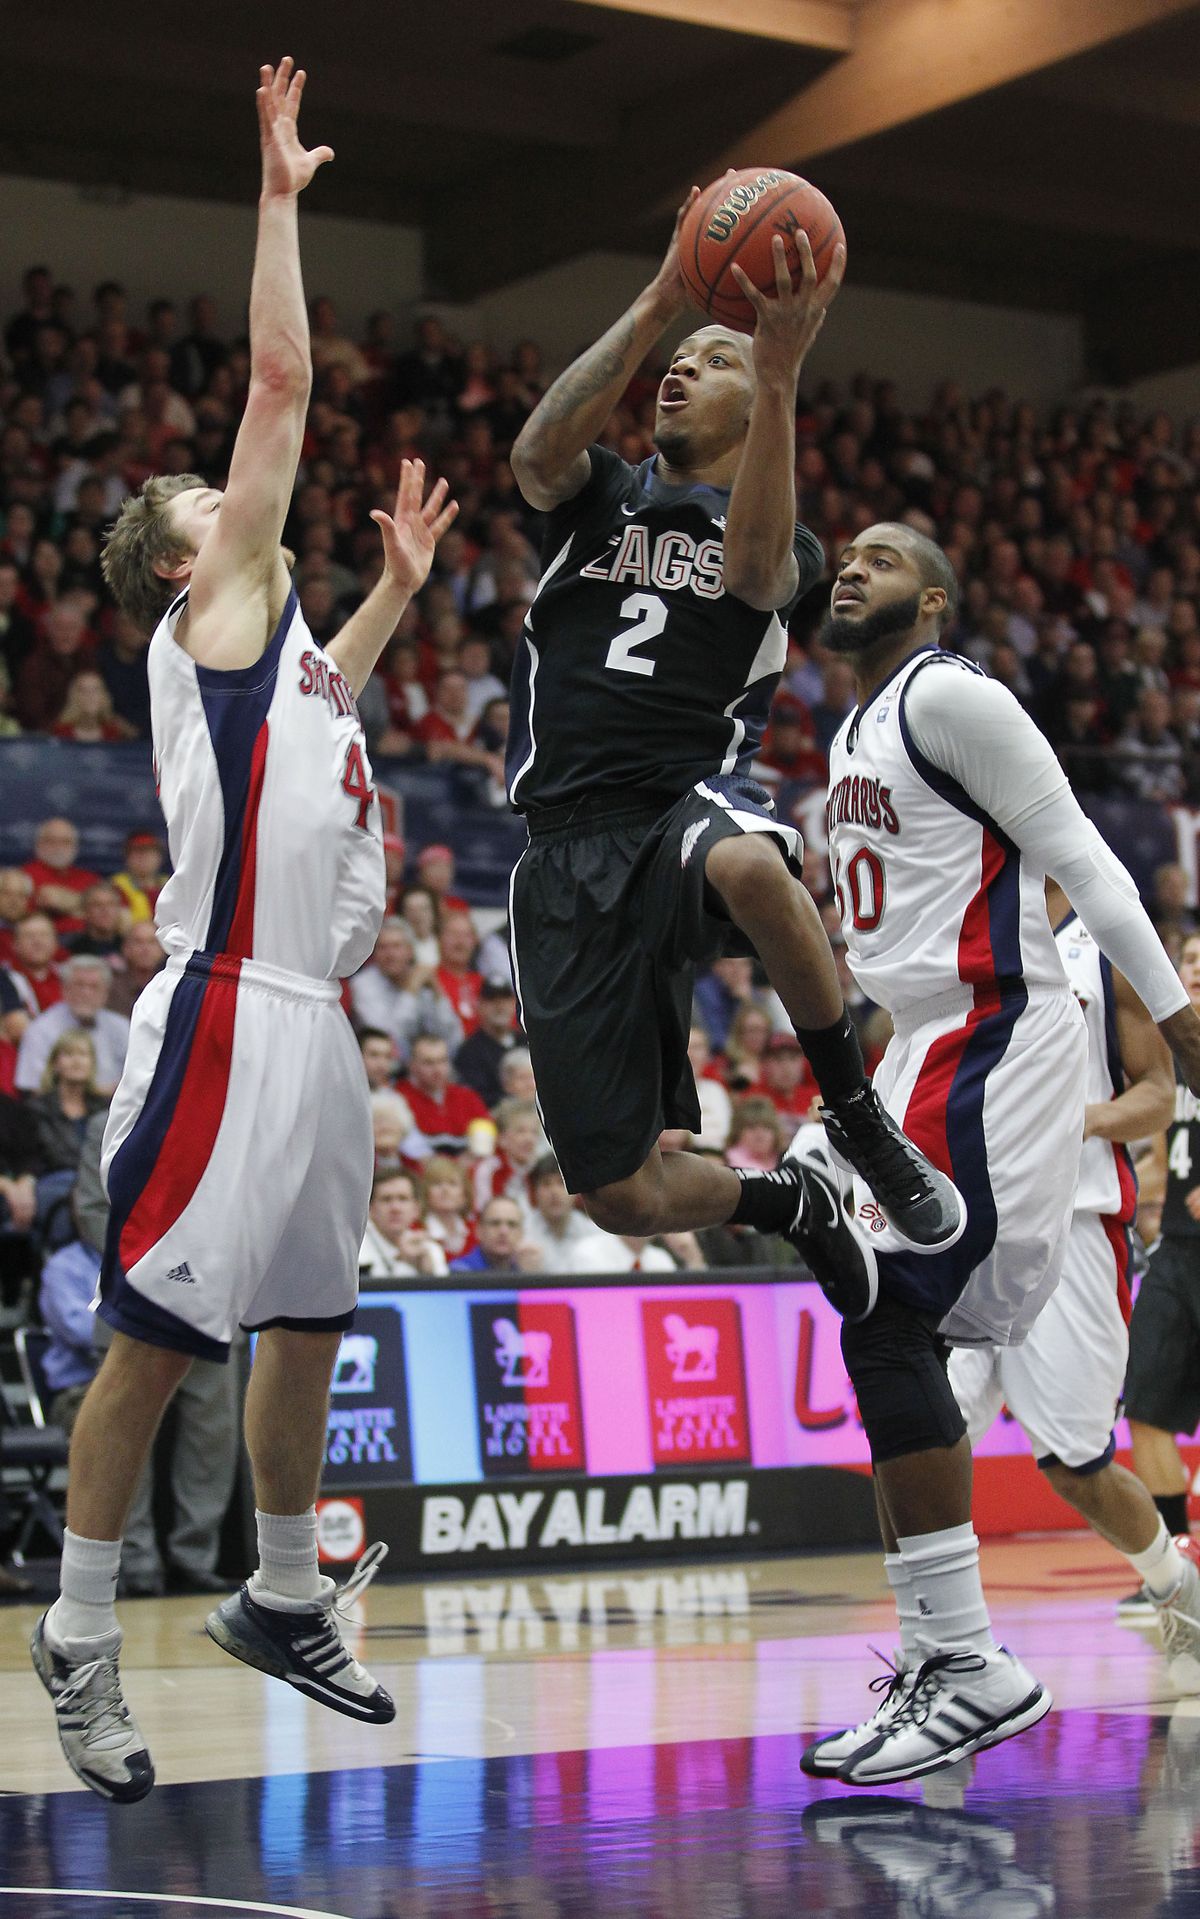 Gonzaga guard Marquise Carter (2) drives to the basket between St. Mary